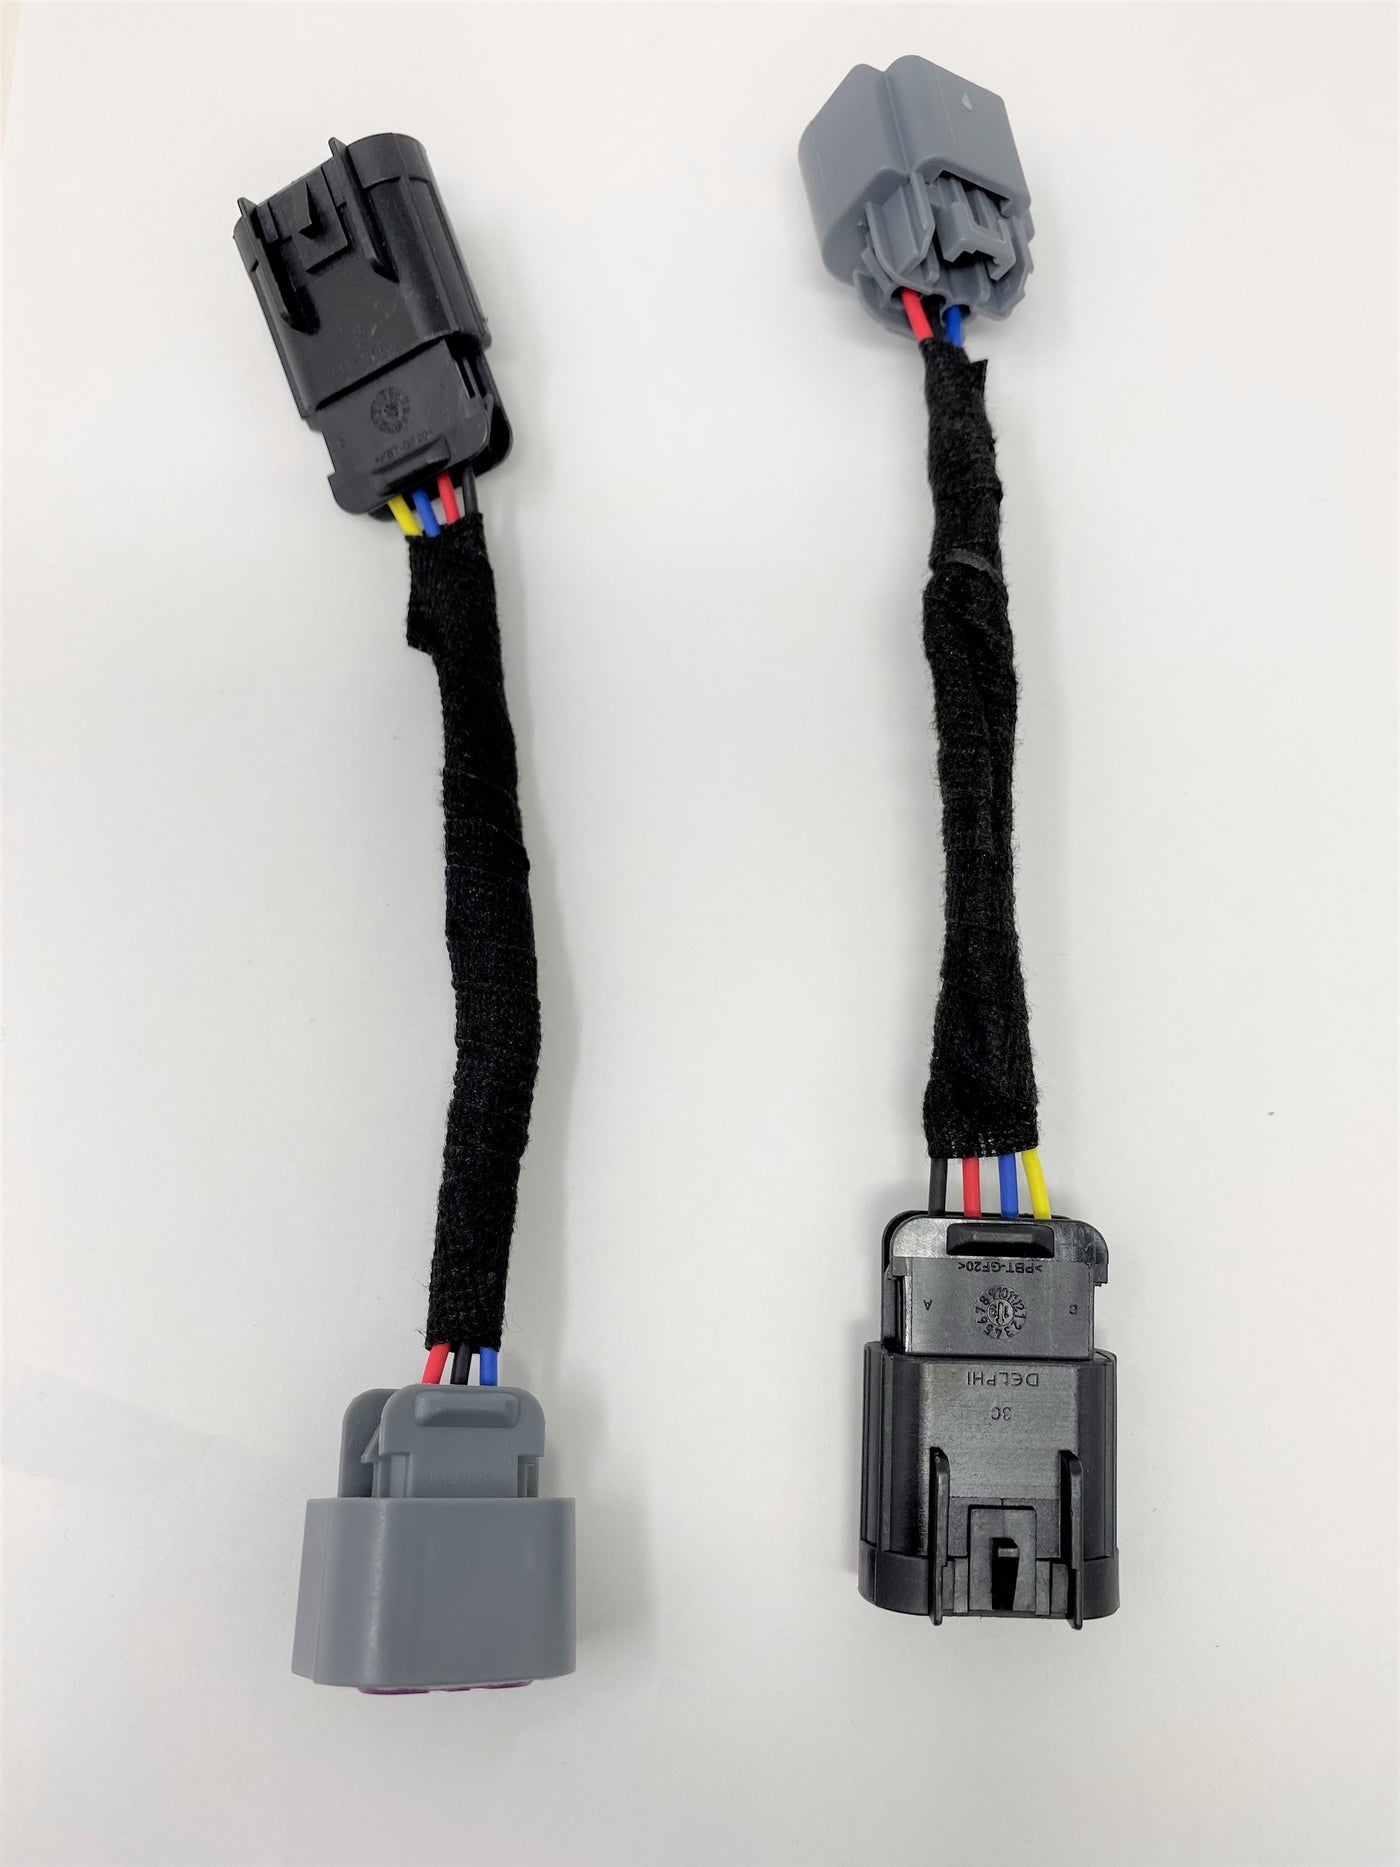 5th Gen 2010/2013 RS to 2010/2013 Non RS Headlight Harness